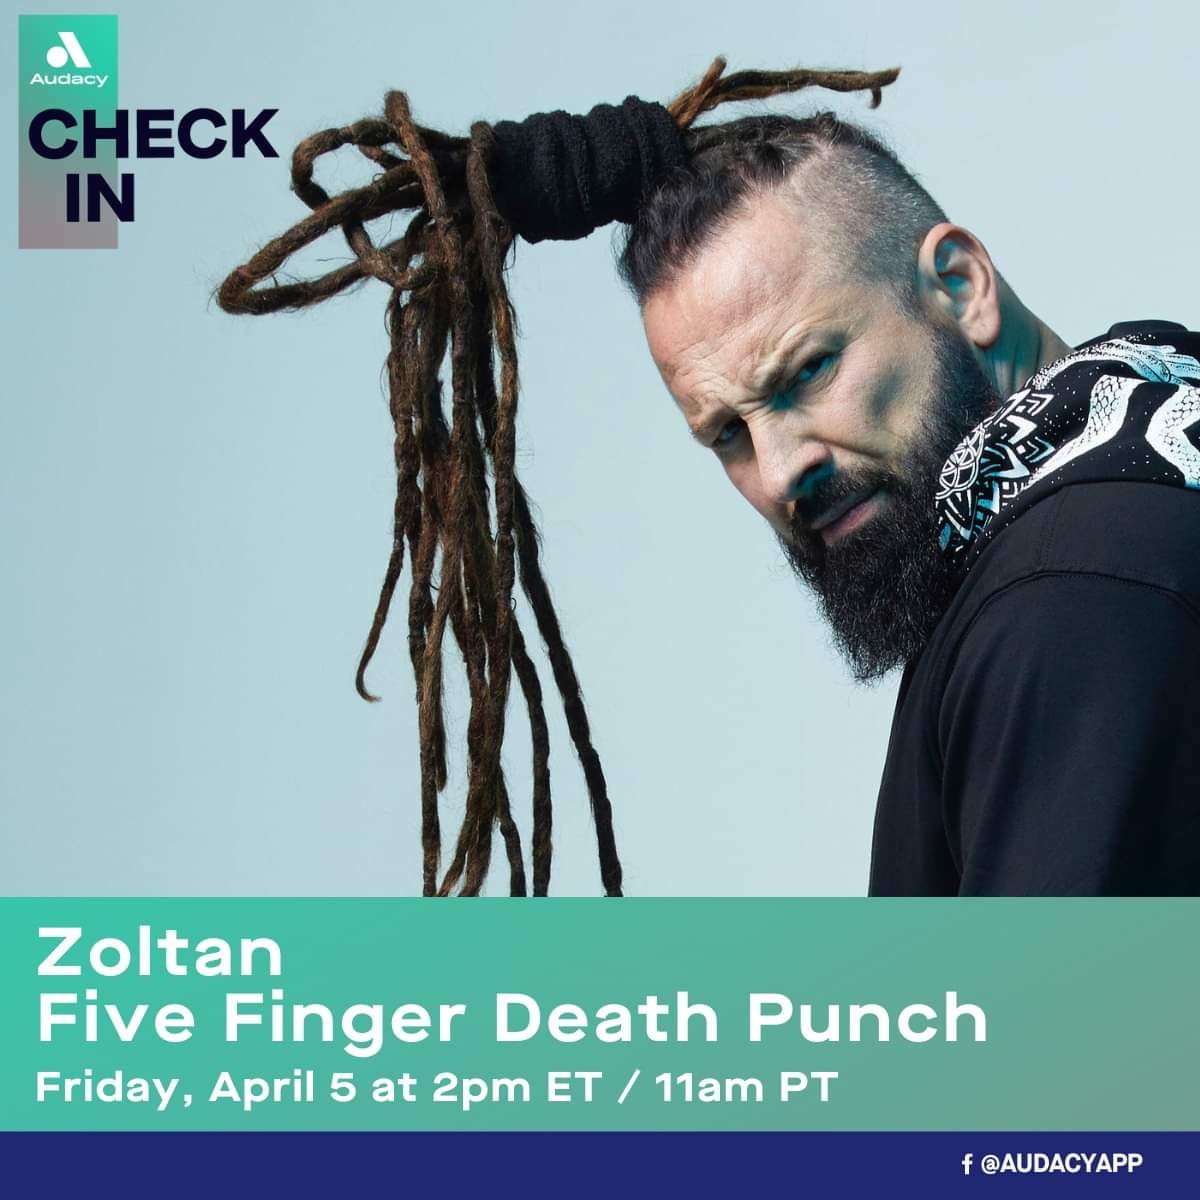 Get ready to rock out as Zoltan of Five Finger Death Punch stops by #AudacyCheckIn to chat with @abekanan about the deluxe edition of 'AFTERLIFE' 🎸
Tune in Fri, 4/5 at 2PM ET ➡️ auda.cy/FFDPCheckIn